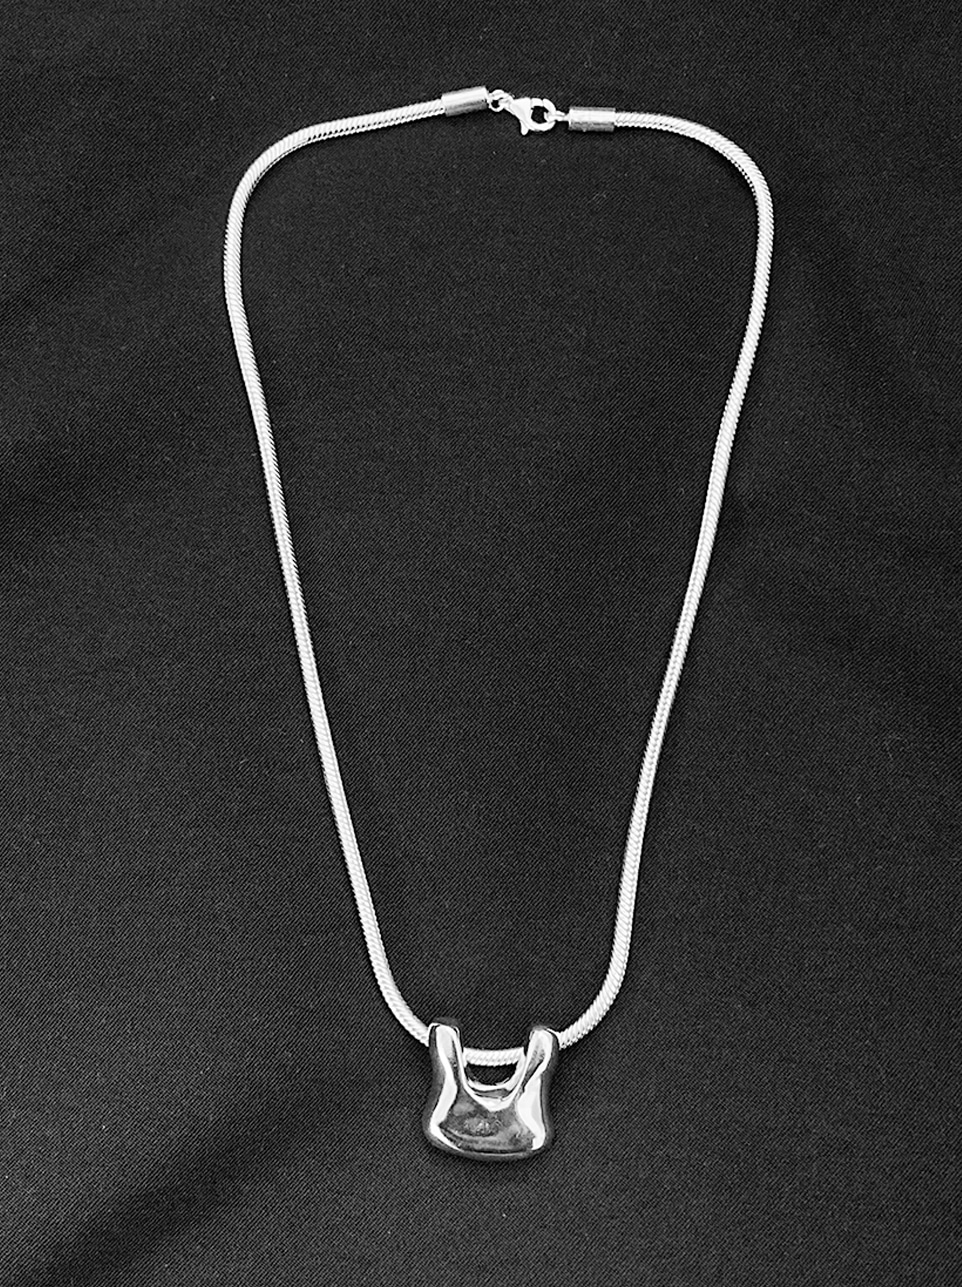 Classic hold necklace